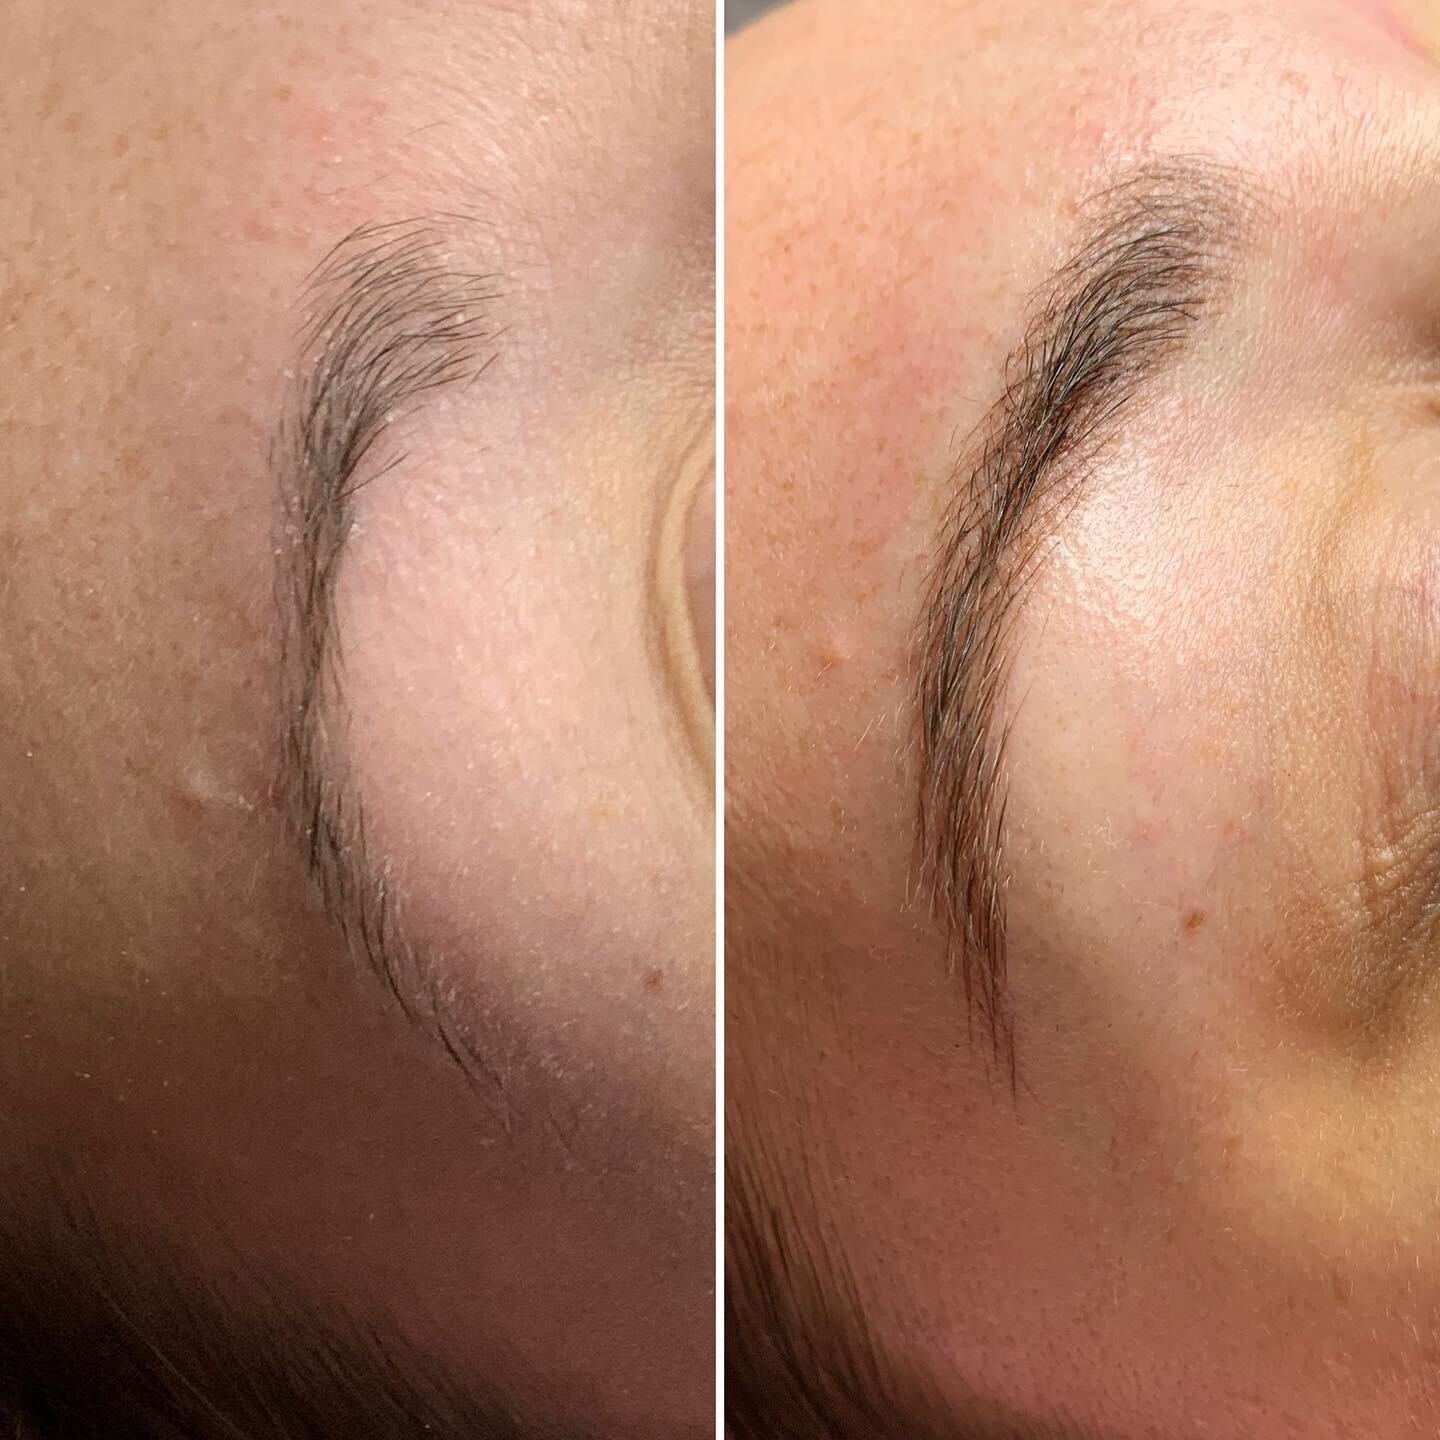 microblading 1st session before and after #microblading #lafayetteindiana #westlafayetteindiana #naturalmicroblading #fluffybrowclub #honeyskinsocial #womenownedbusiness  #pmuartist #licensedesthetician